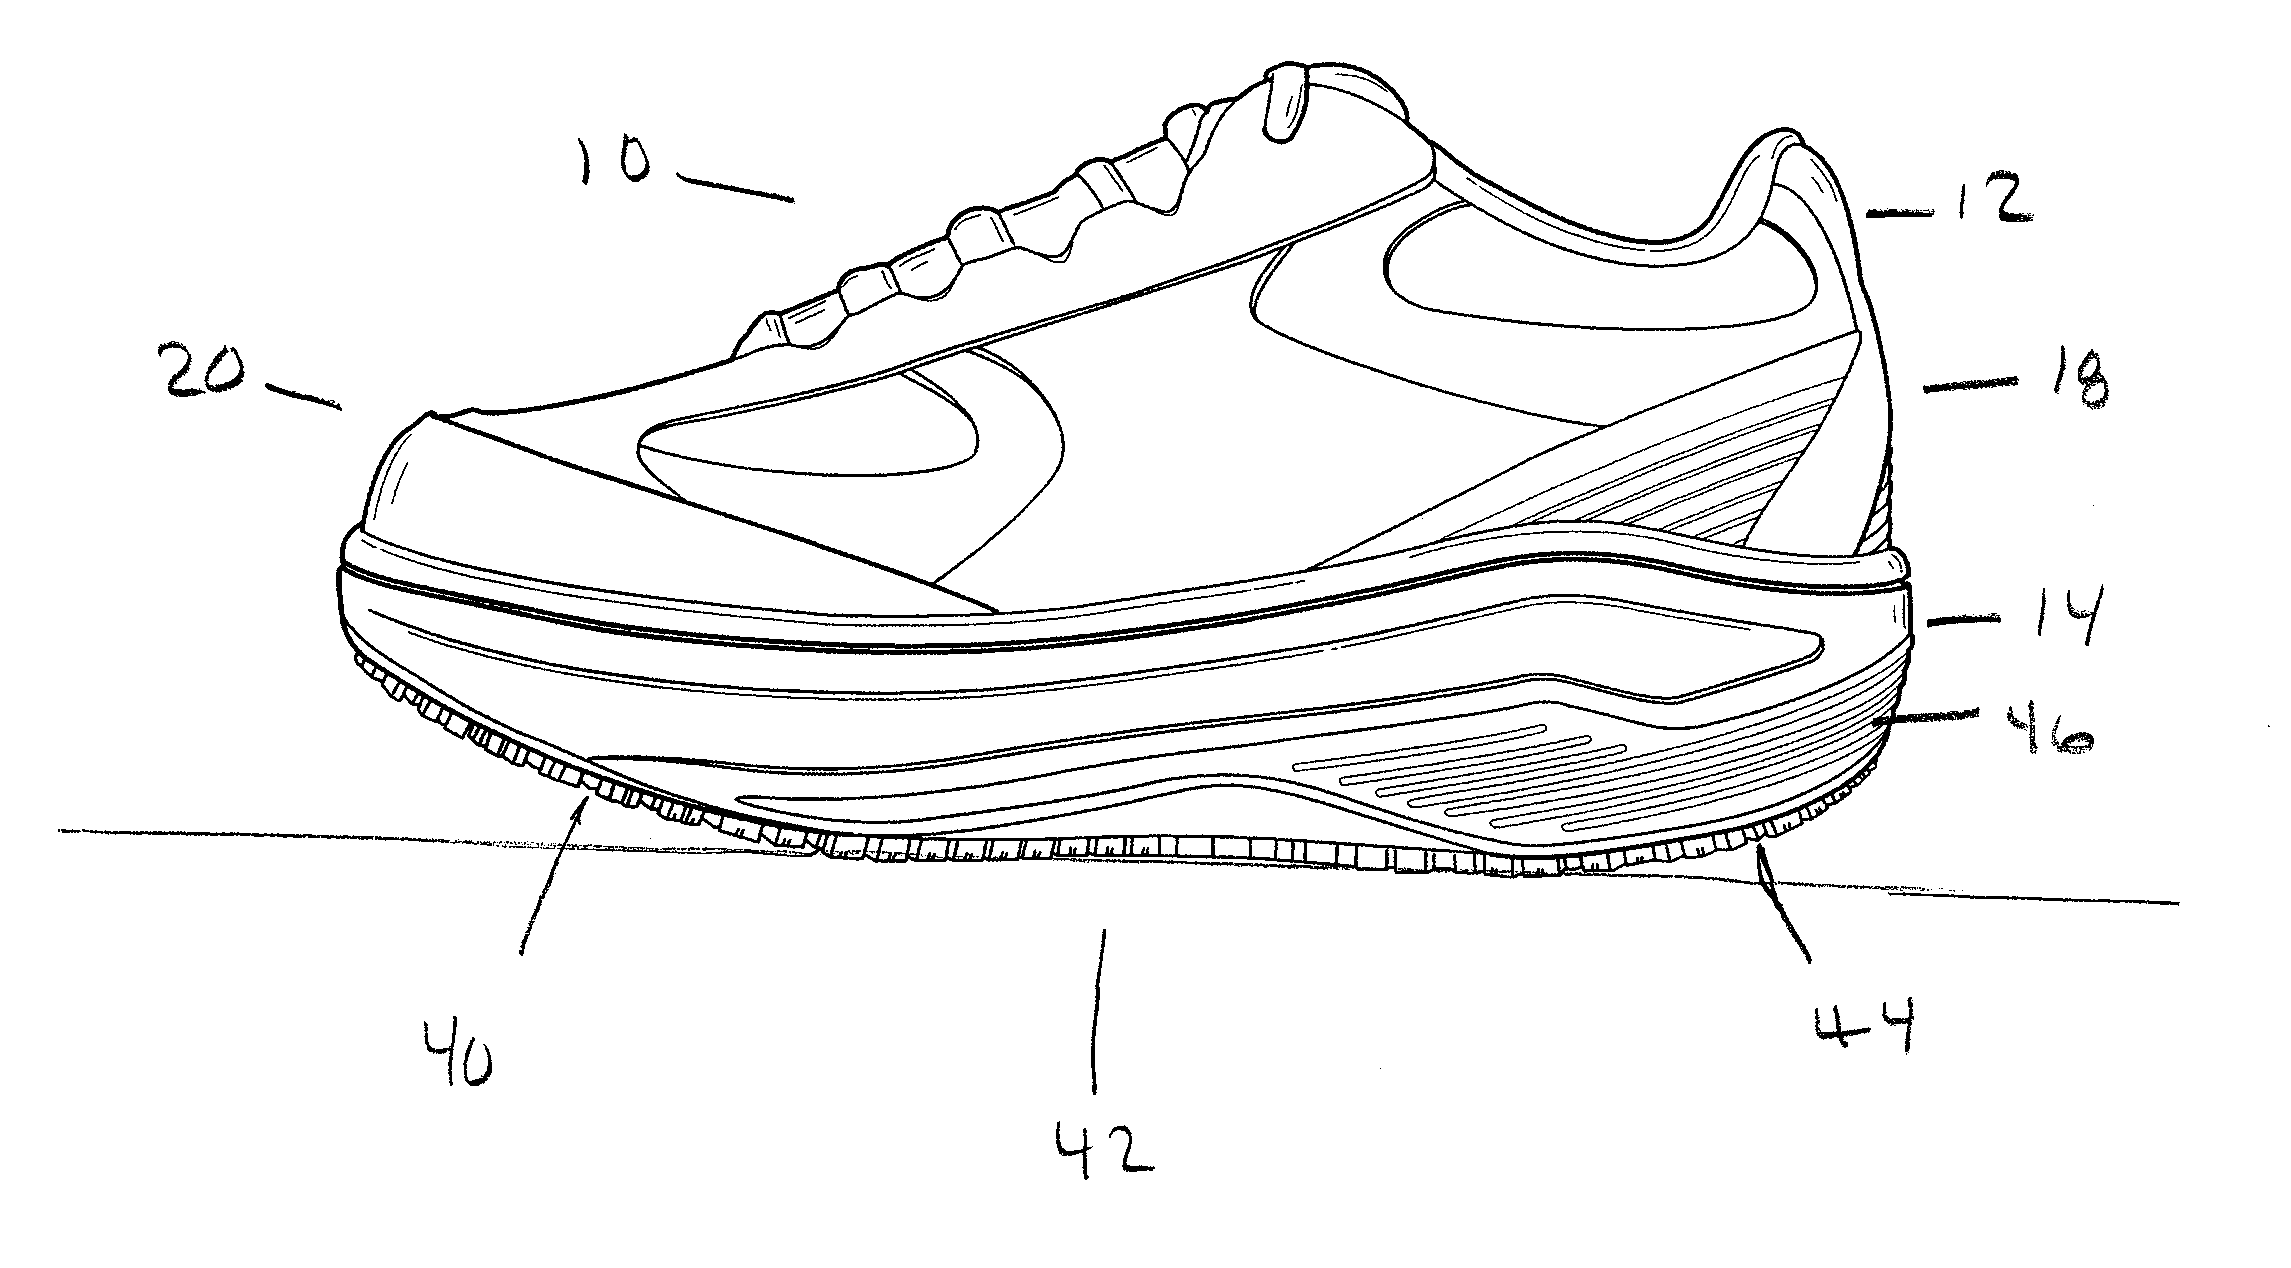 Shoe Construction Having A Rocker Shaped Bottom And Integral Stabilizer